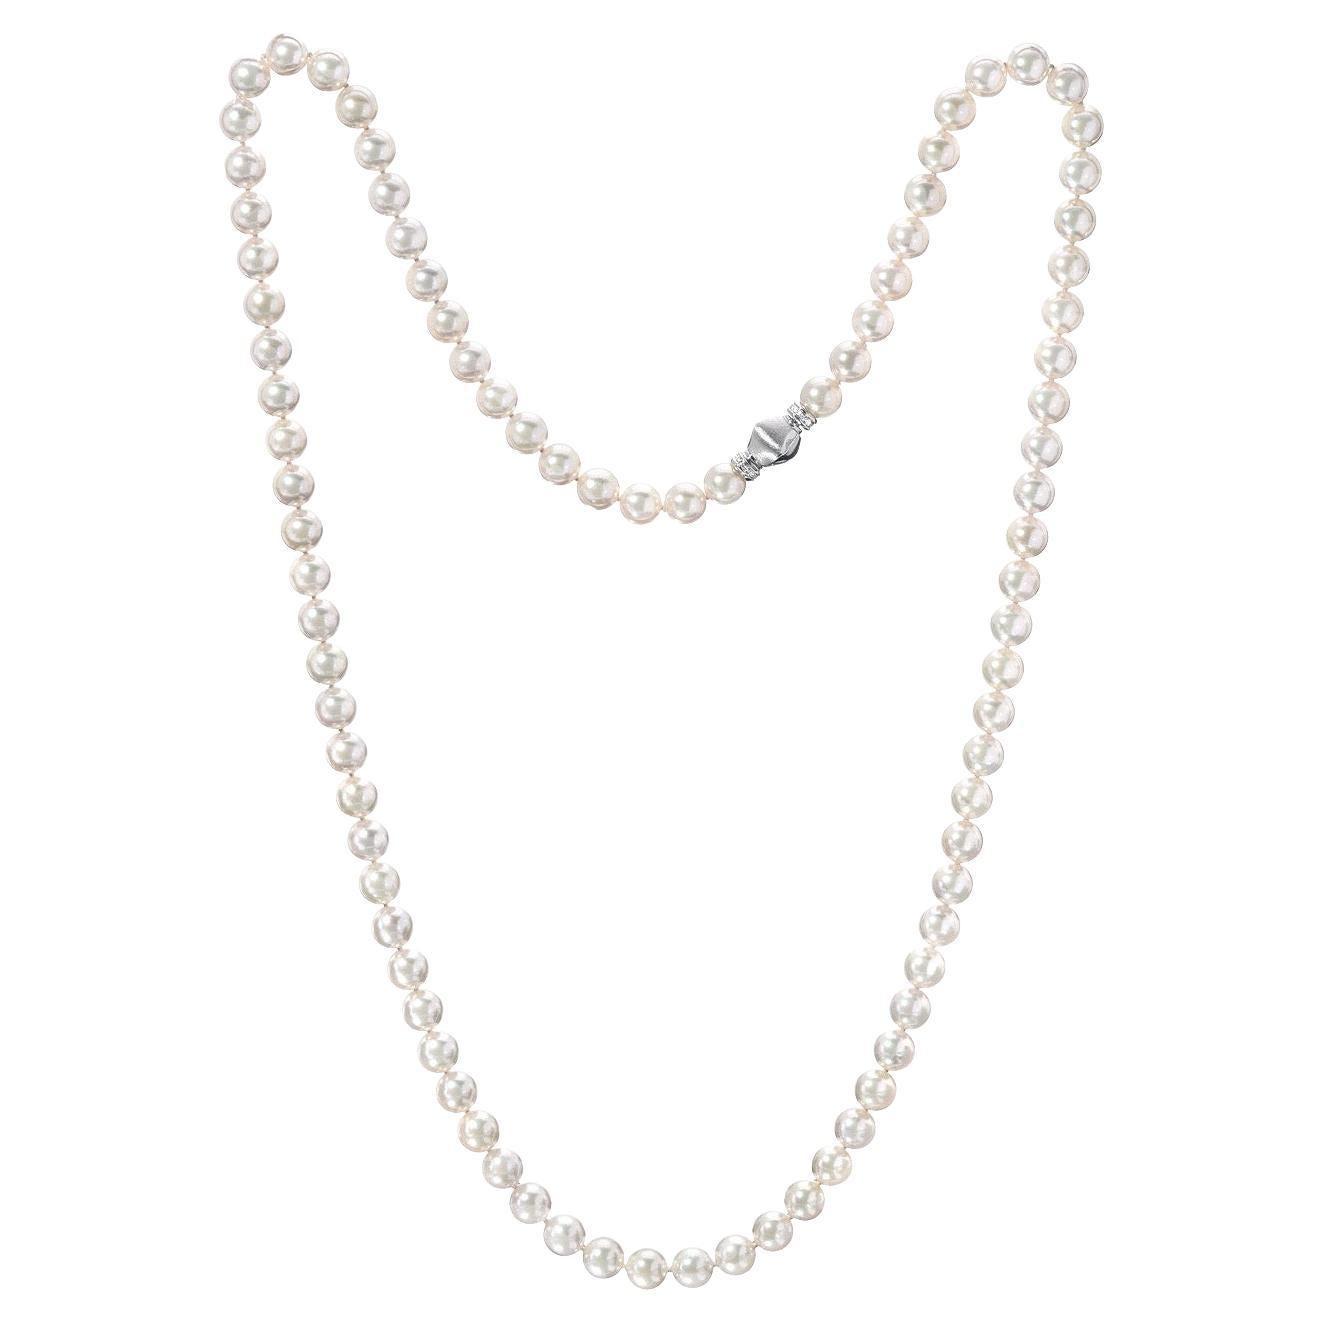 Top quality 9.5mm-10mm round Japanese Akoya Pearl Necklace fastened by an 18K white gold clasp. Total length is 35